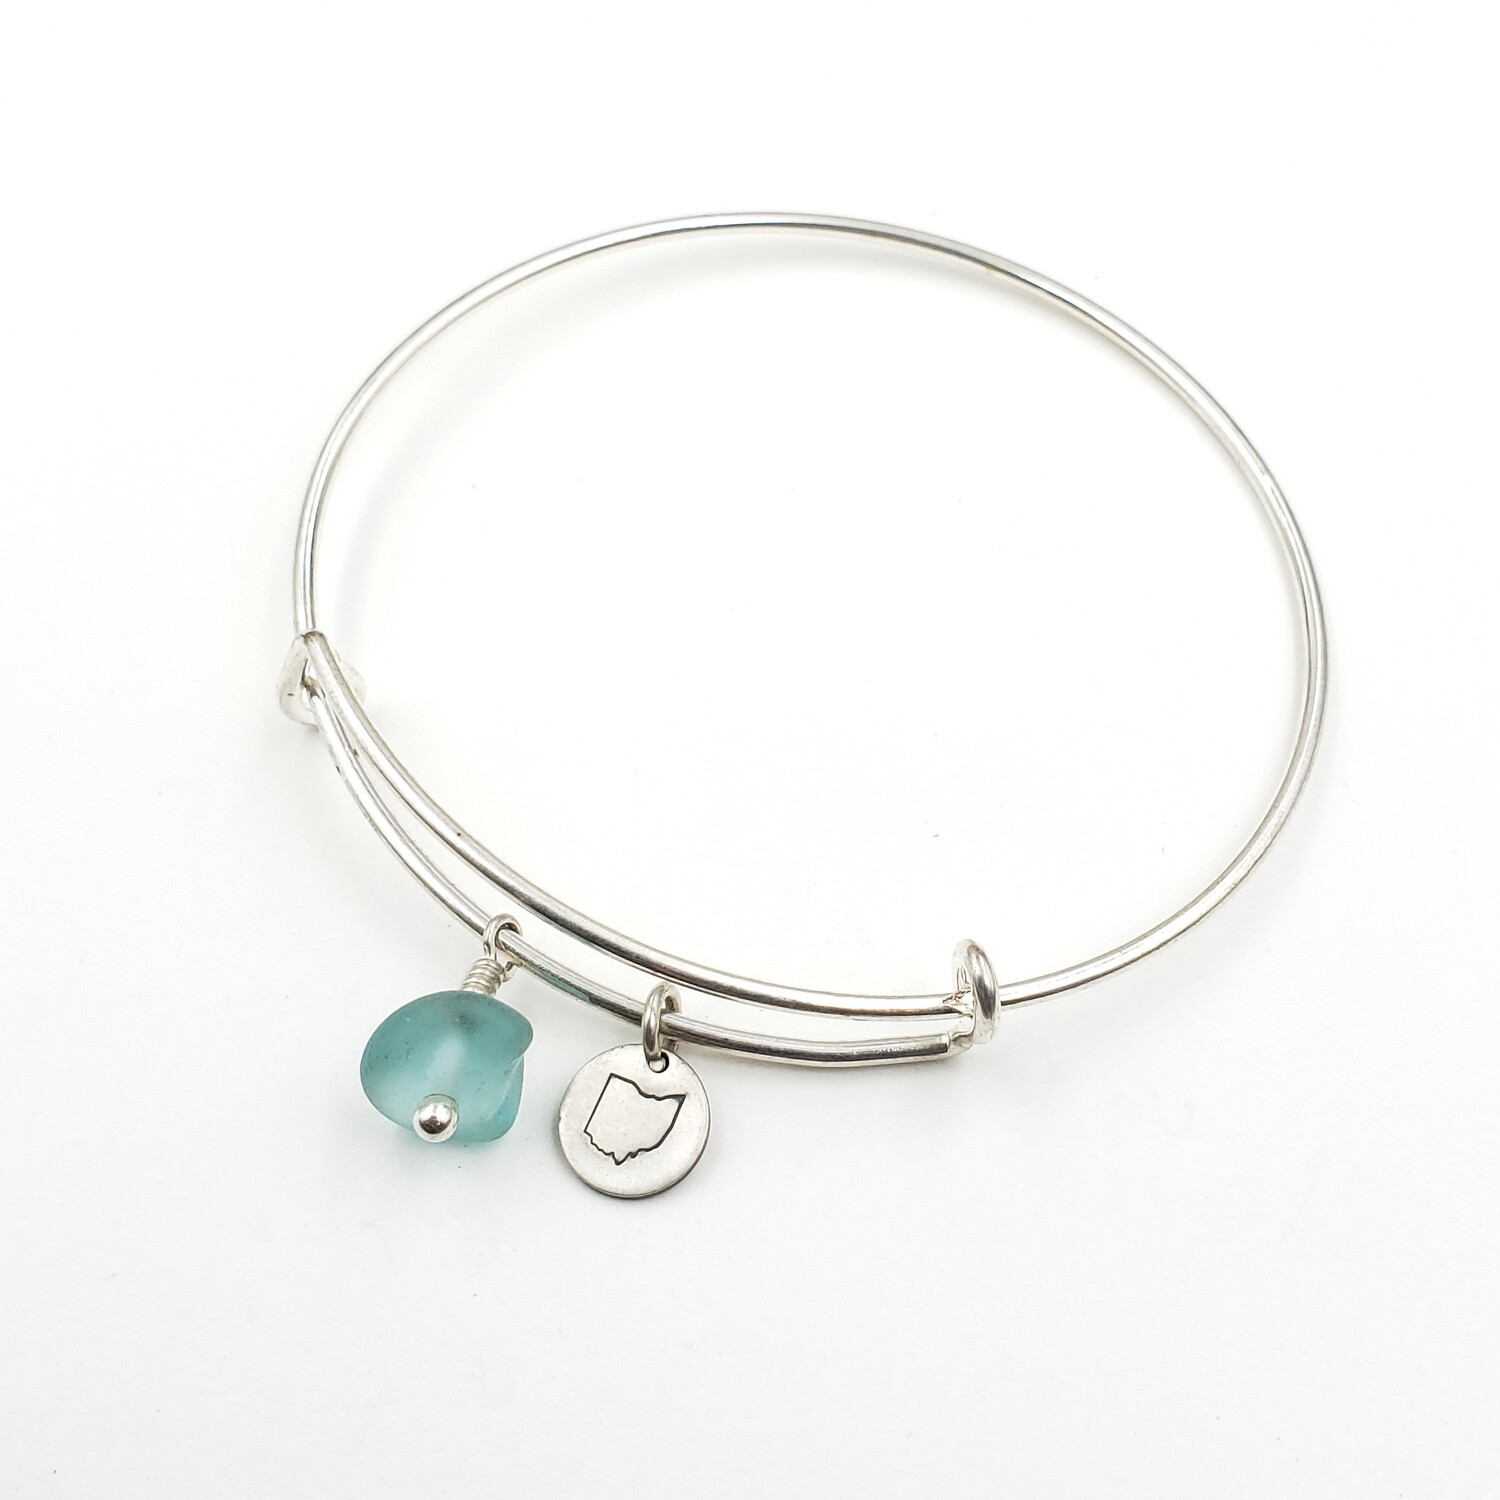 Bangle Bracelet with Stamped State of Ohio Charm and Light Blue Lake Erie Beach Glass